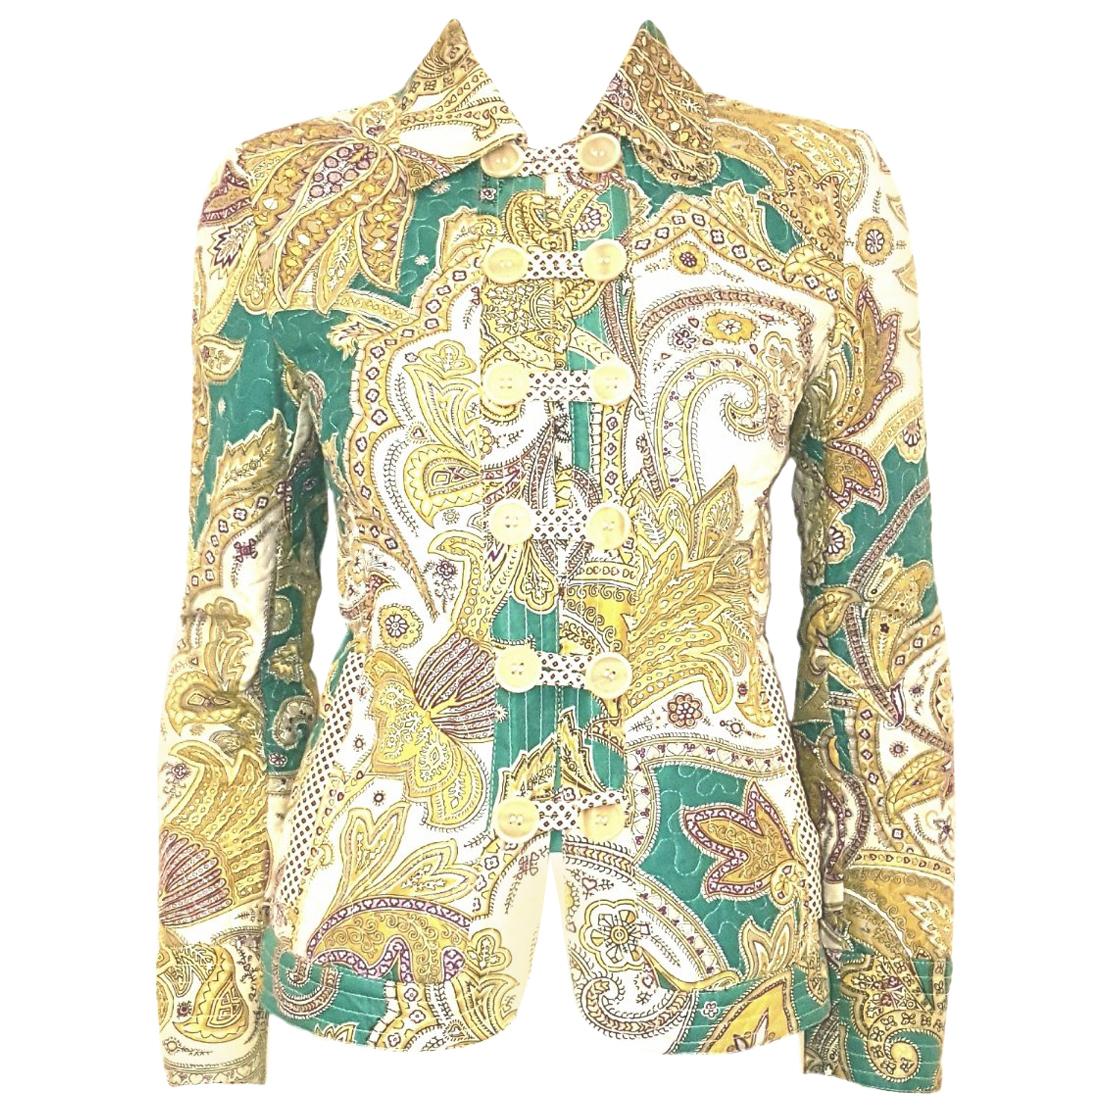  Etro Garden Floral Paisley Green/Yellow Quilted Jacket W/ Tab Buttons For Sale